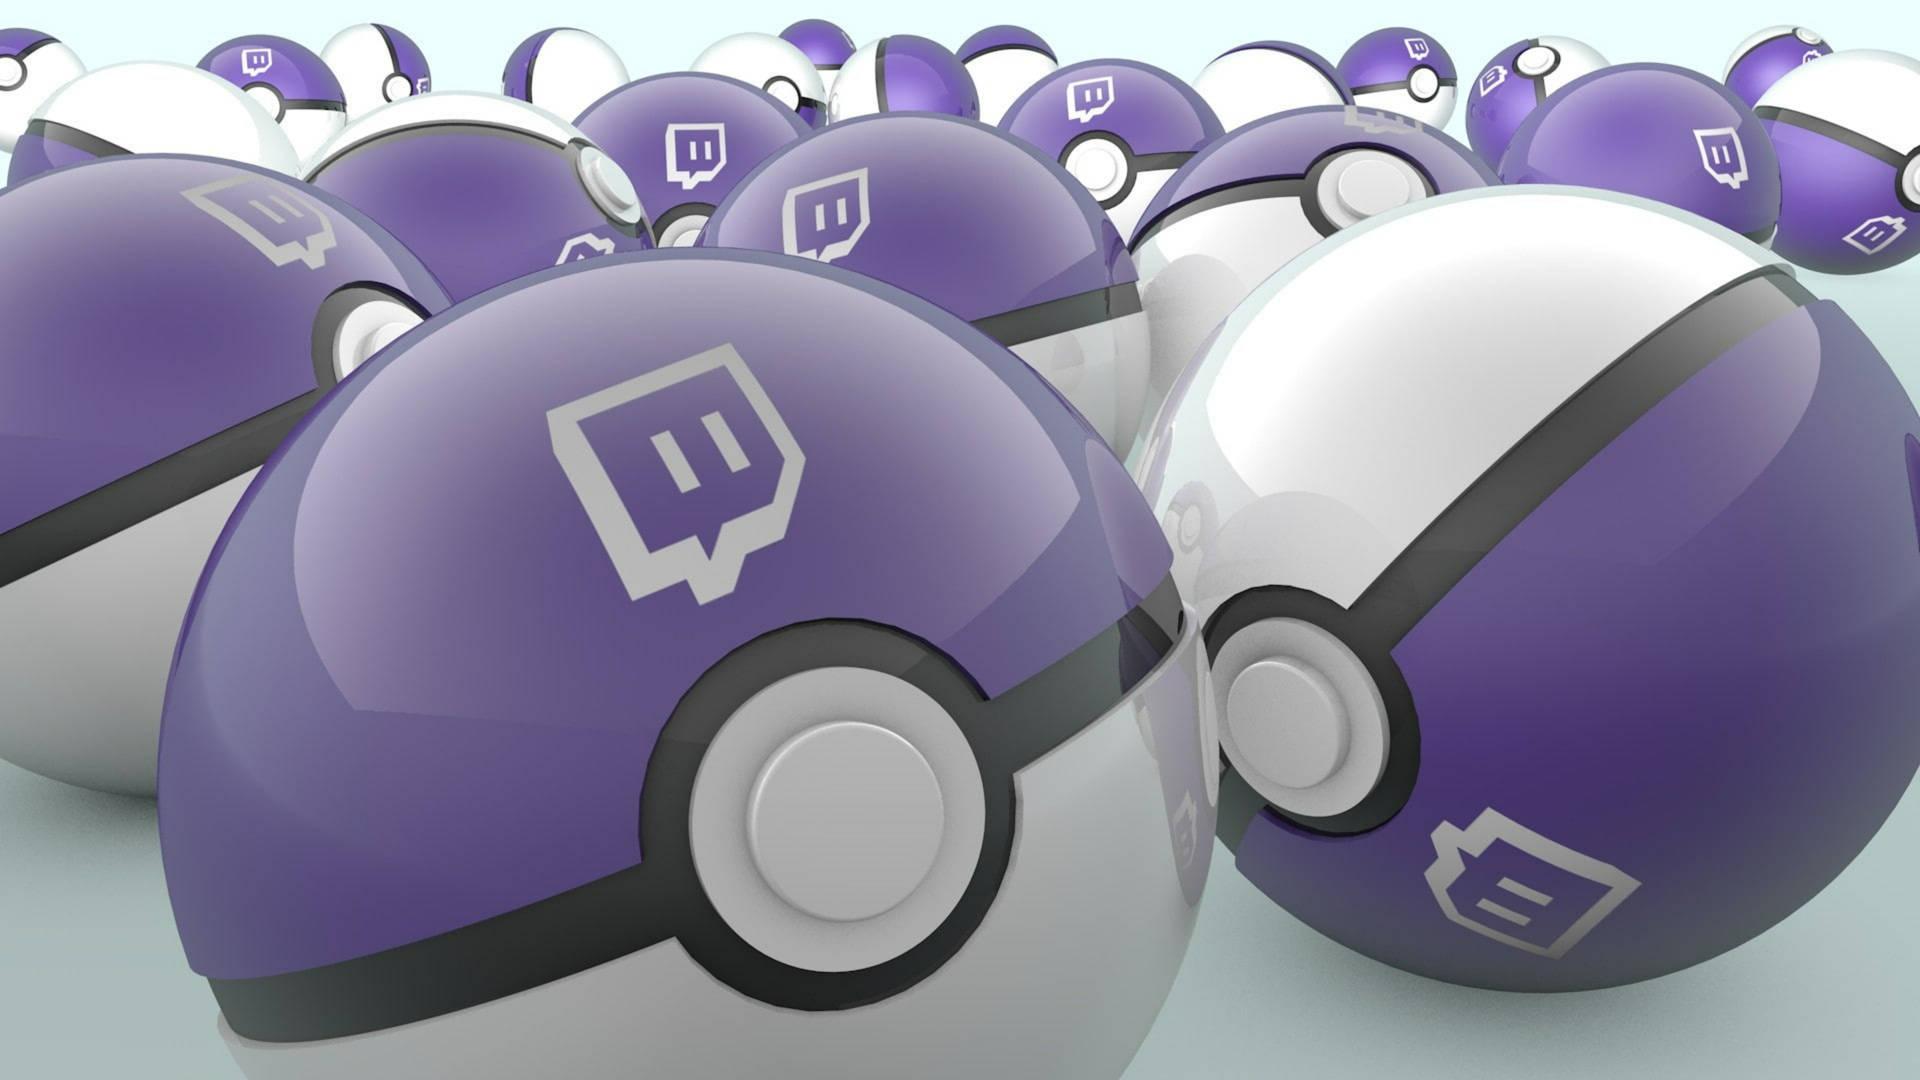 Twitch Icon In Pokeball Background